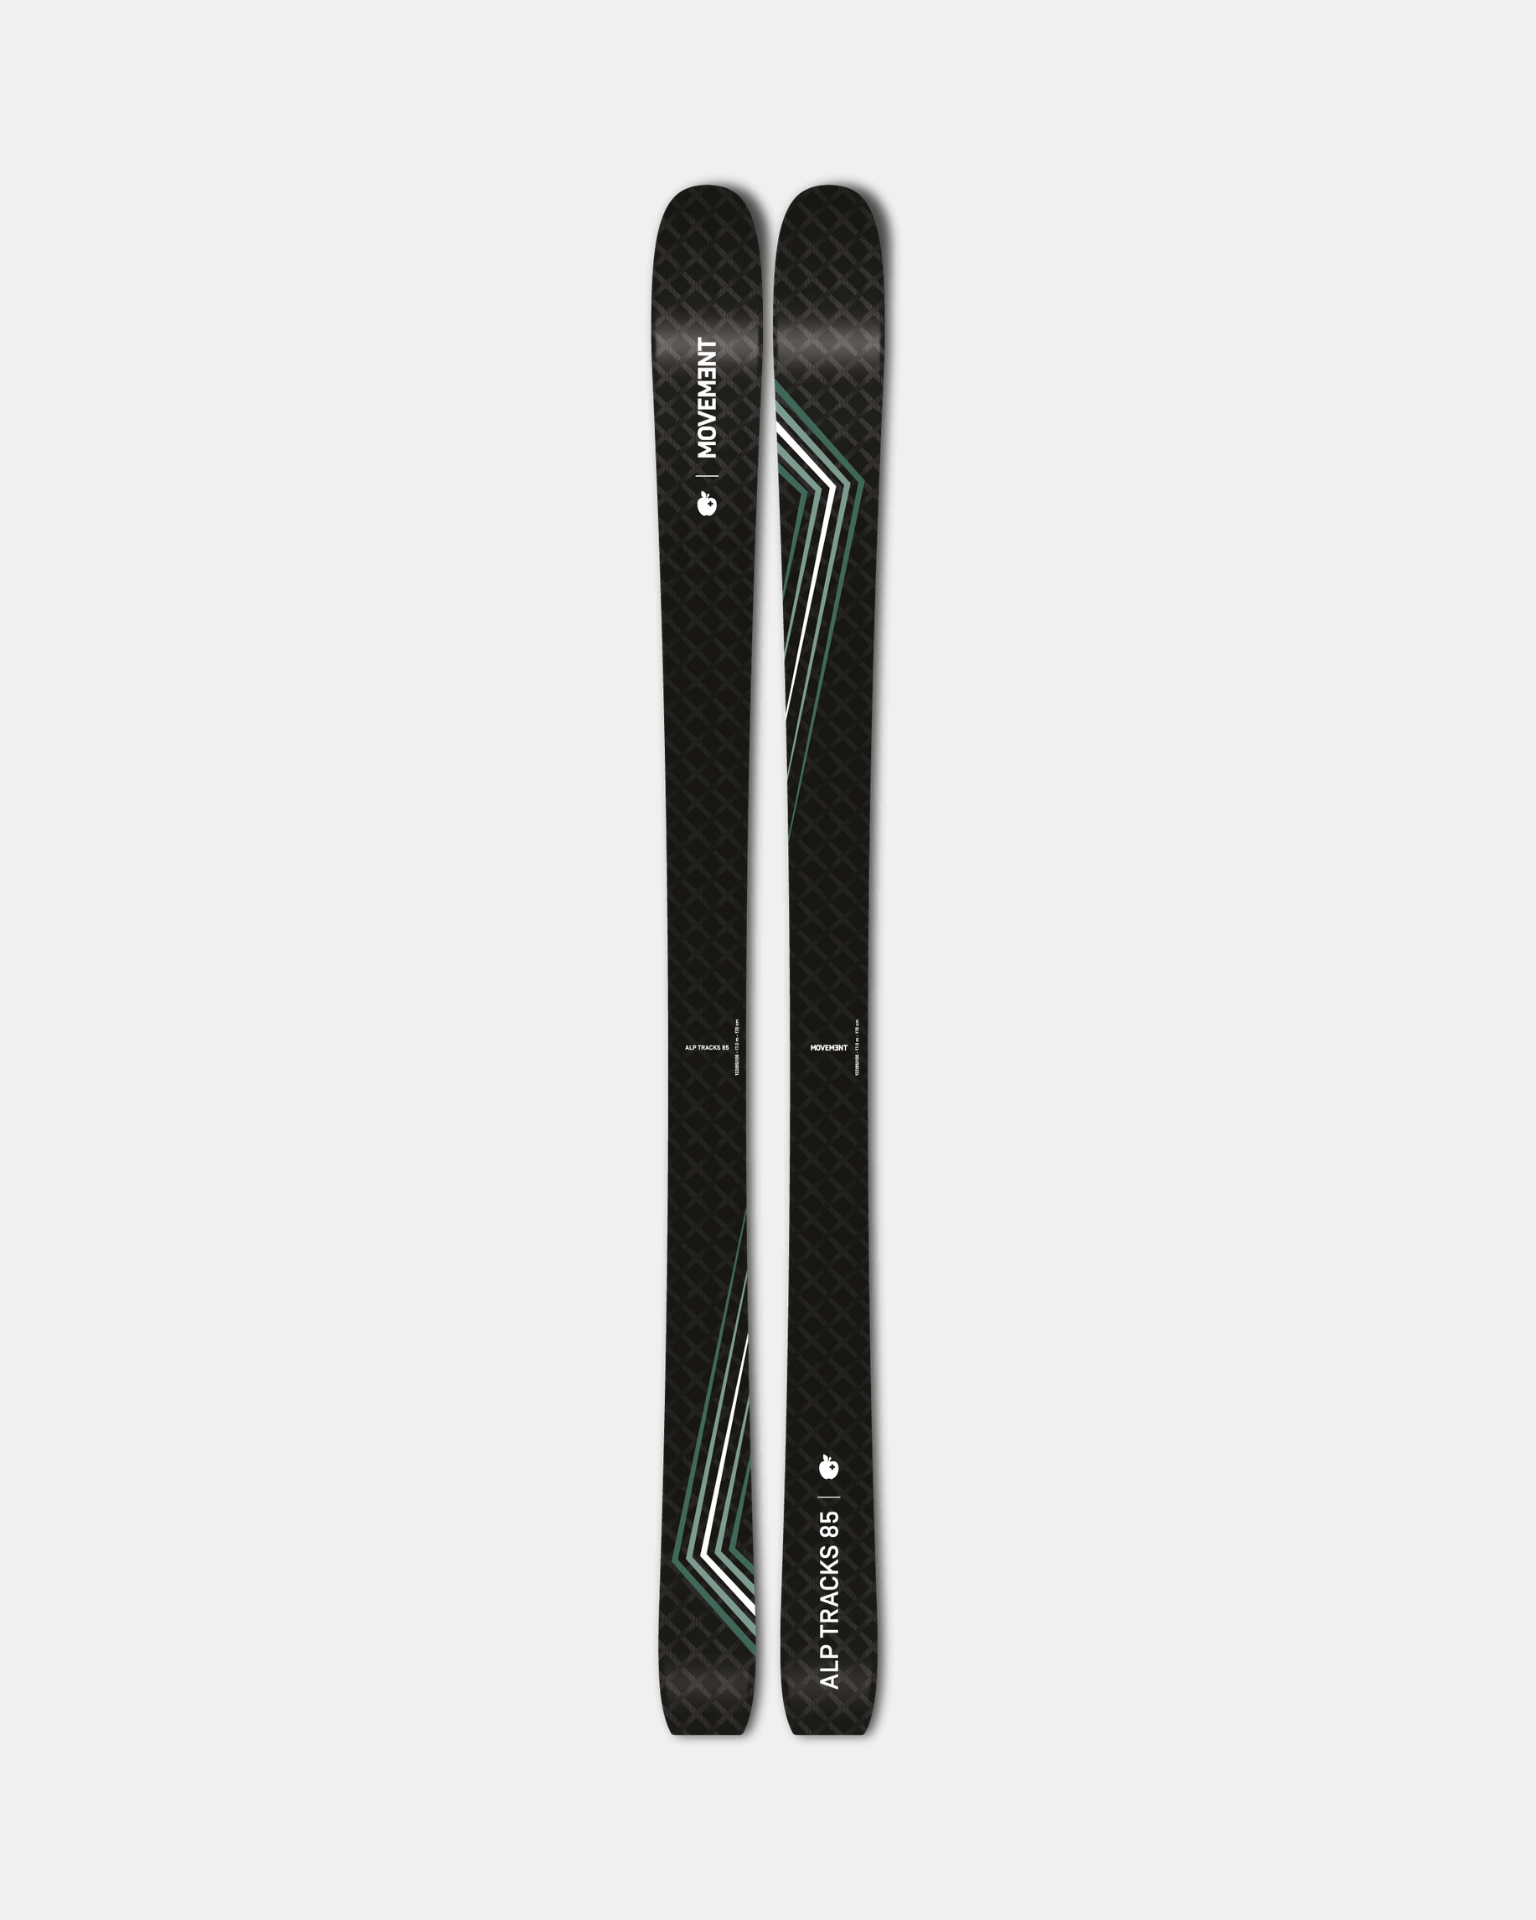 Embrace the mountains with Movement's Alp Tracks 85W skis as your guide.